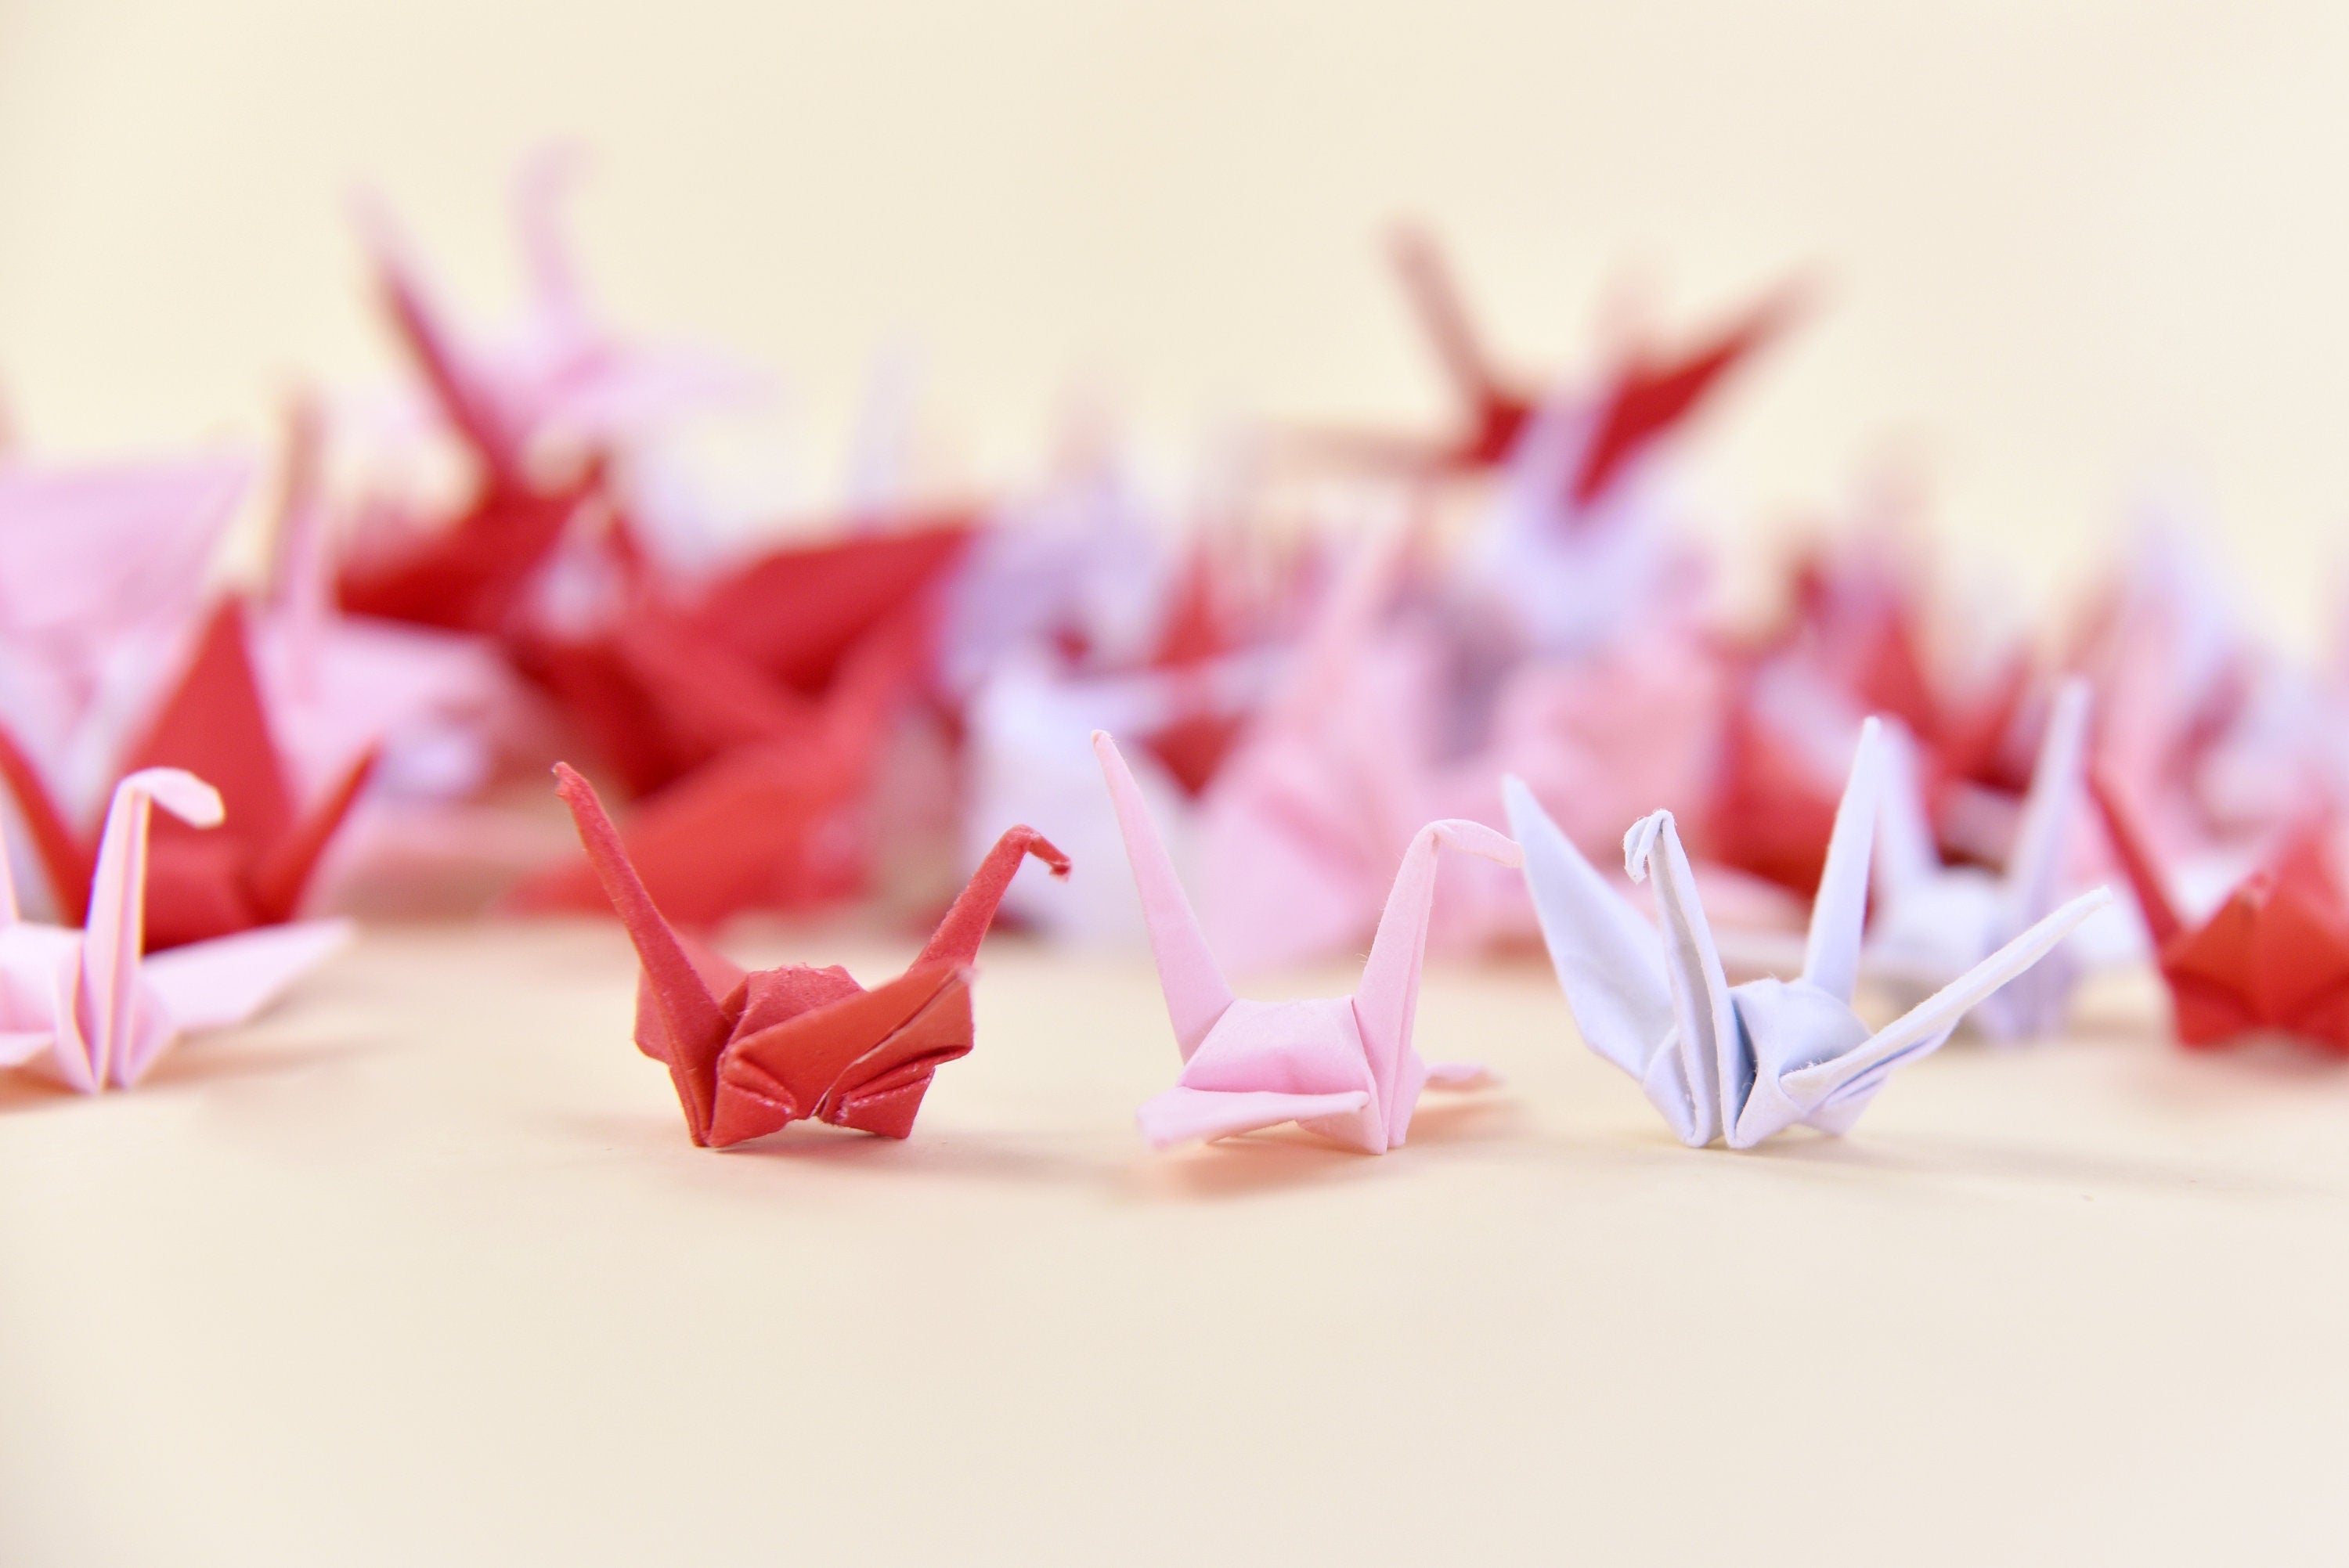 1000 Origami Paper Crane Red Pink White Shade Tone - Small 3.81 cm (1.5 inches) - for Wedding Party, Valentine Gift